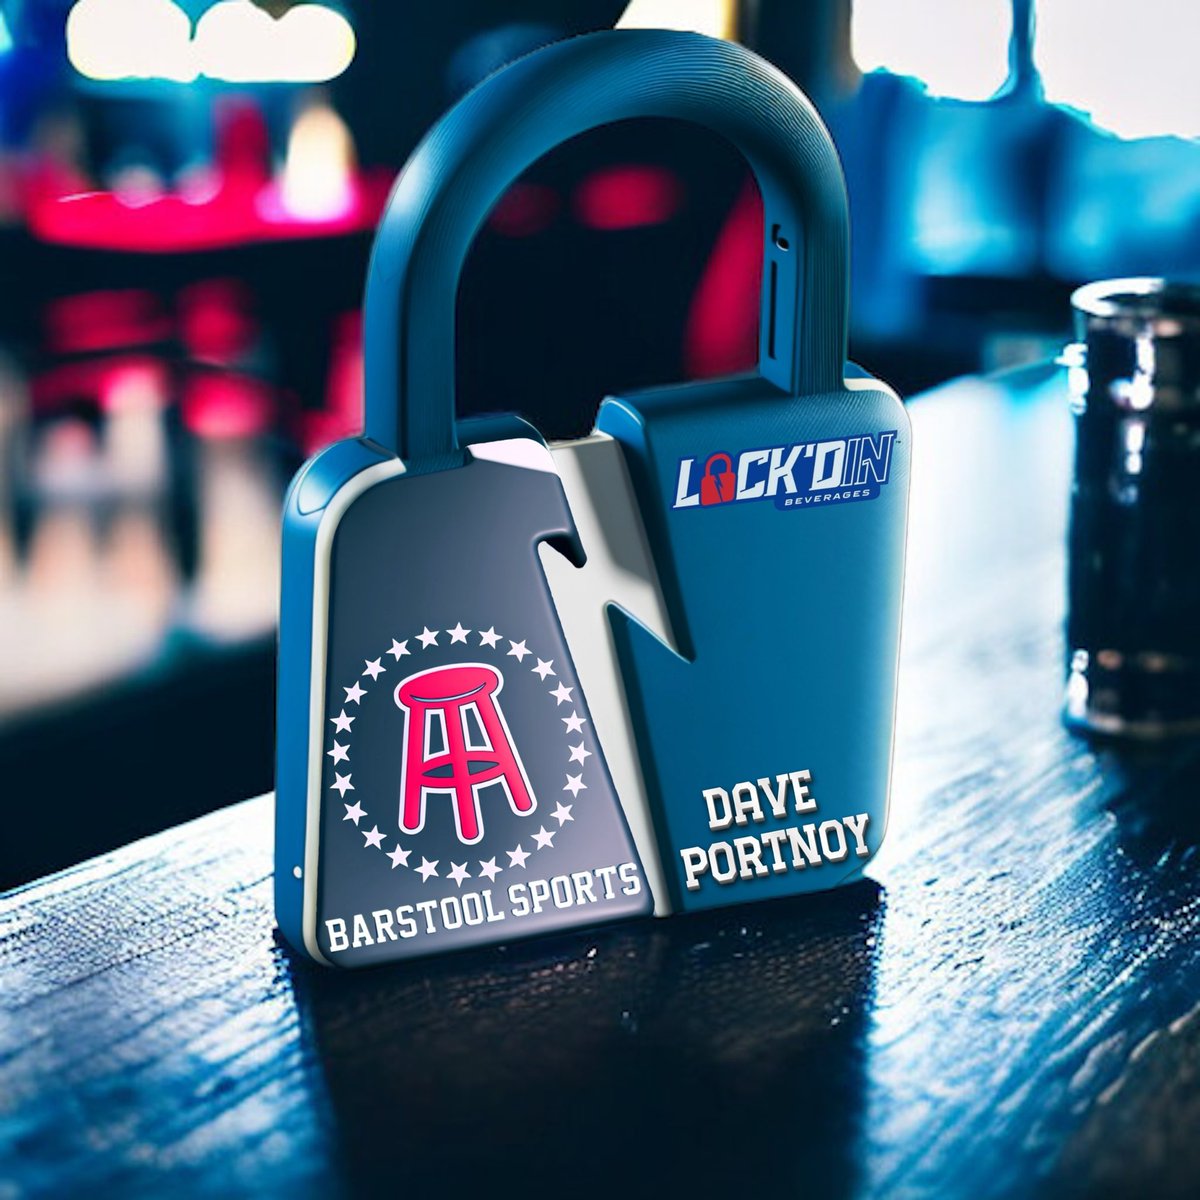 $LTNC Couldn’t find a good picture to use of #Misspeaches , but @stoolpresidente I hope you like this lock dude 🔒 , hope you can try the @LiveLockdIn products! They are fantastic without a dought! 🙏🏼 #LOCKDIN #LOCKDINation